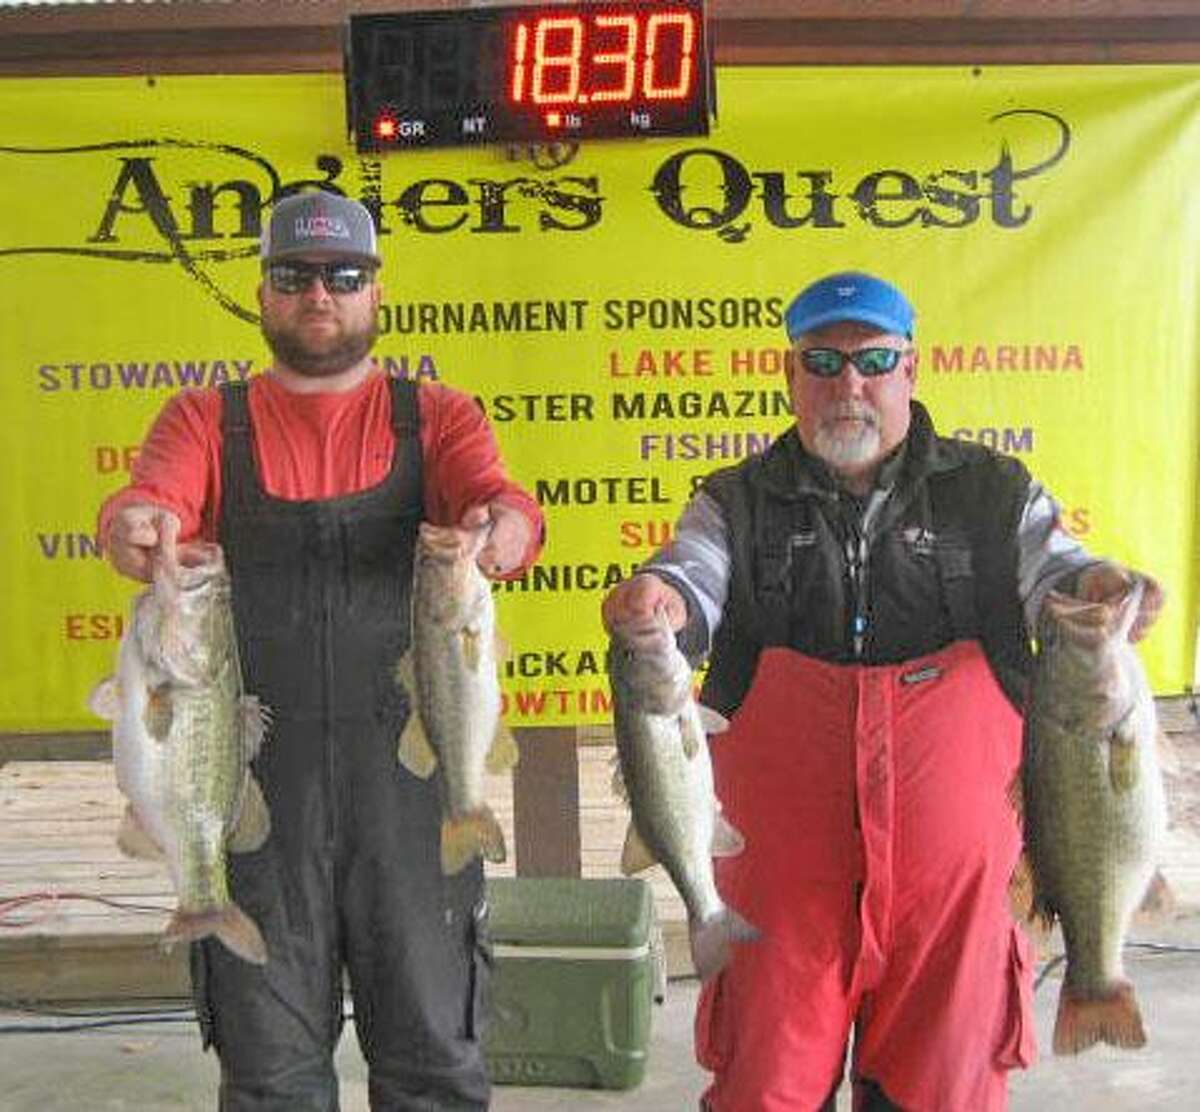 Robert Boley and Thomas Carter had the winning stringer weighing 18.30 pounds and the big bass Anglers Quest Team Tournament Number Two with a weight of 7.17 pounds.